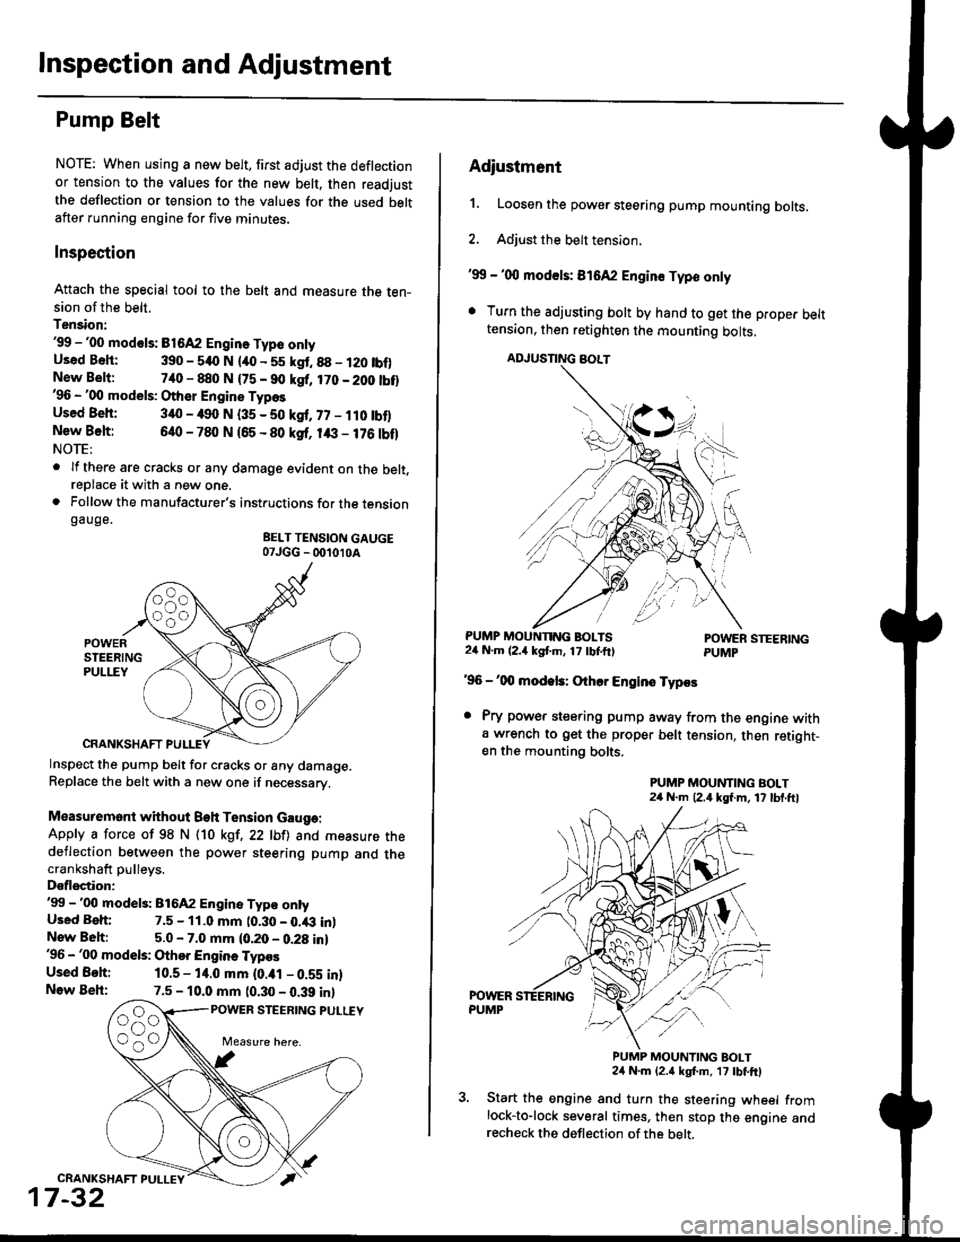 HONDA CIVIC 1996 6.G Workshop Manual Inspection and Adjustment
Pump Belt
NOTE: When using a new belt, first adjust the deflection
or tension to the values for the new belt, then readjust
the deflection or tension to the values for the us